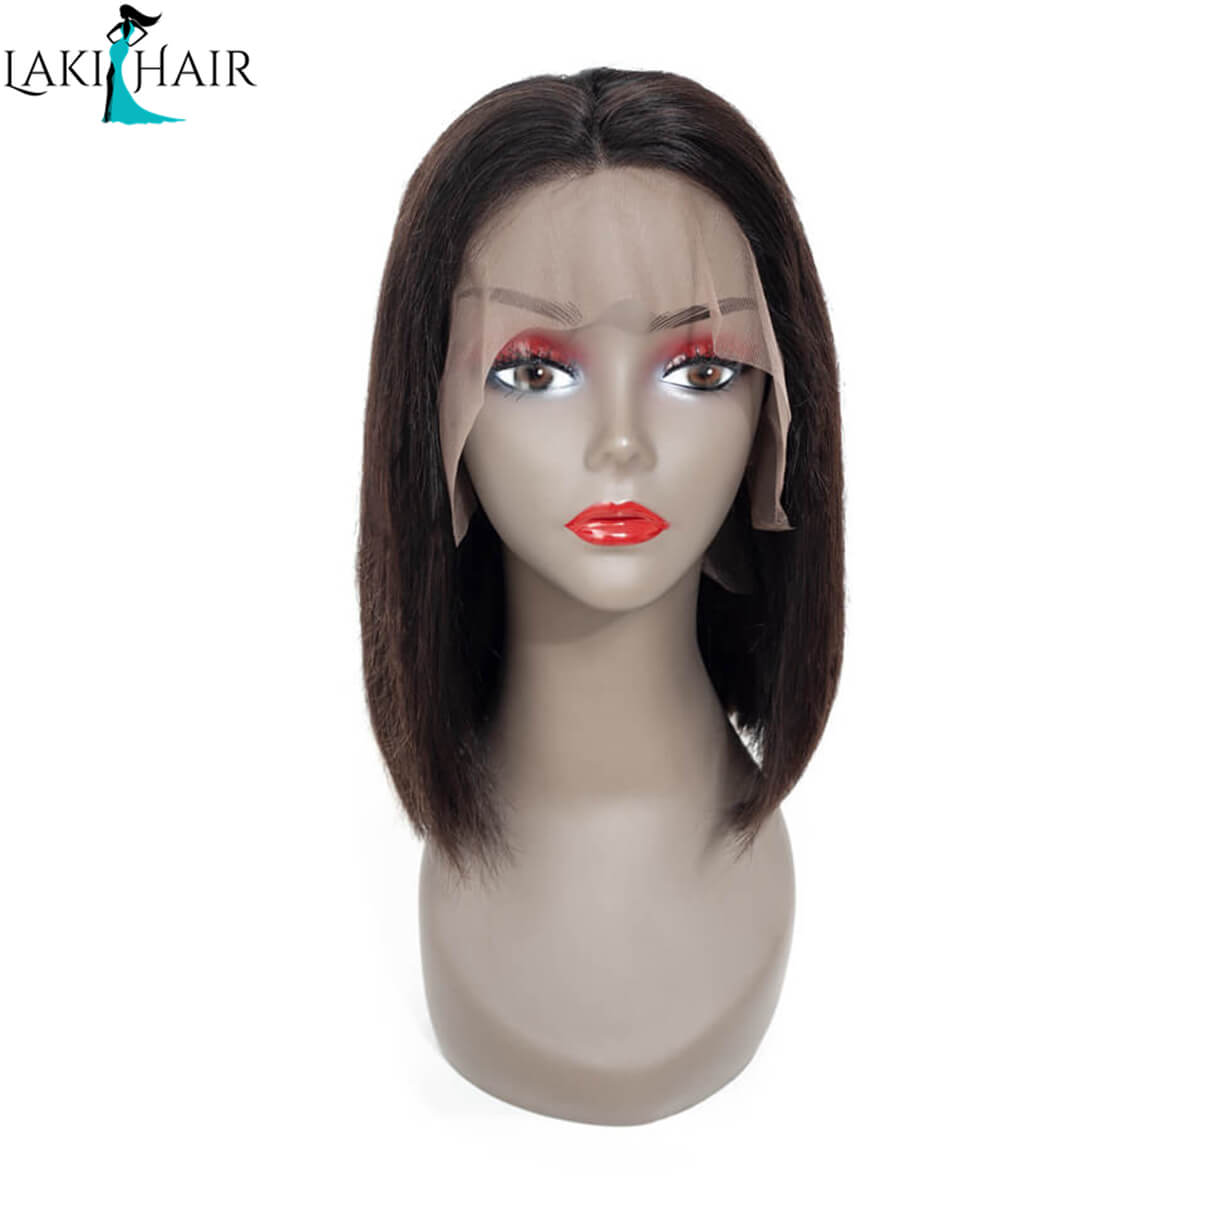 Lakihair Short Lace Front Human Hair Wigs Virgin Brazilian Straight Hair Bob Wigs With Pre Plucked Hairline Bleached Knots 180% Density